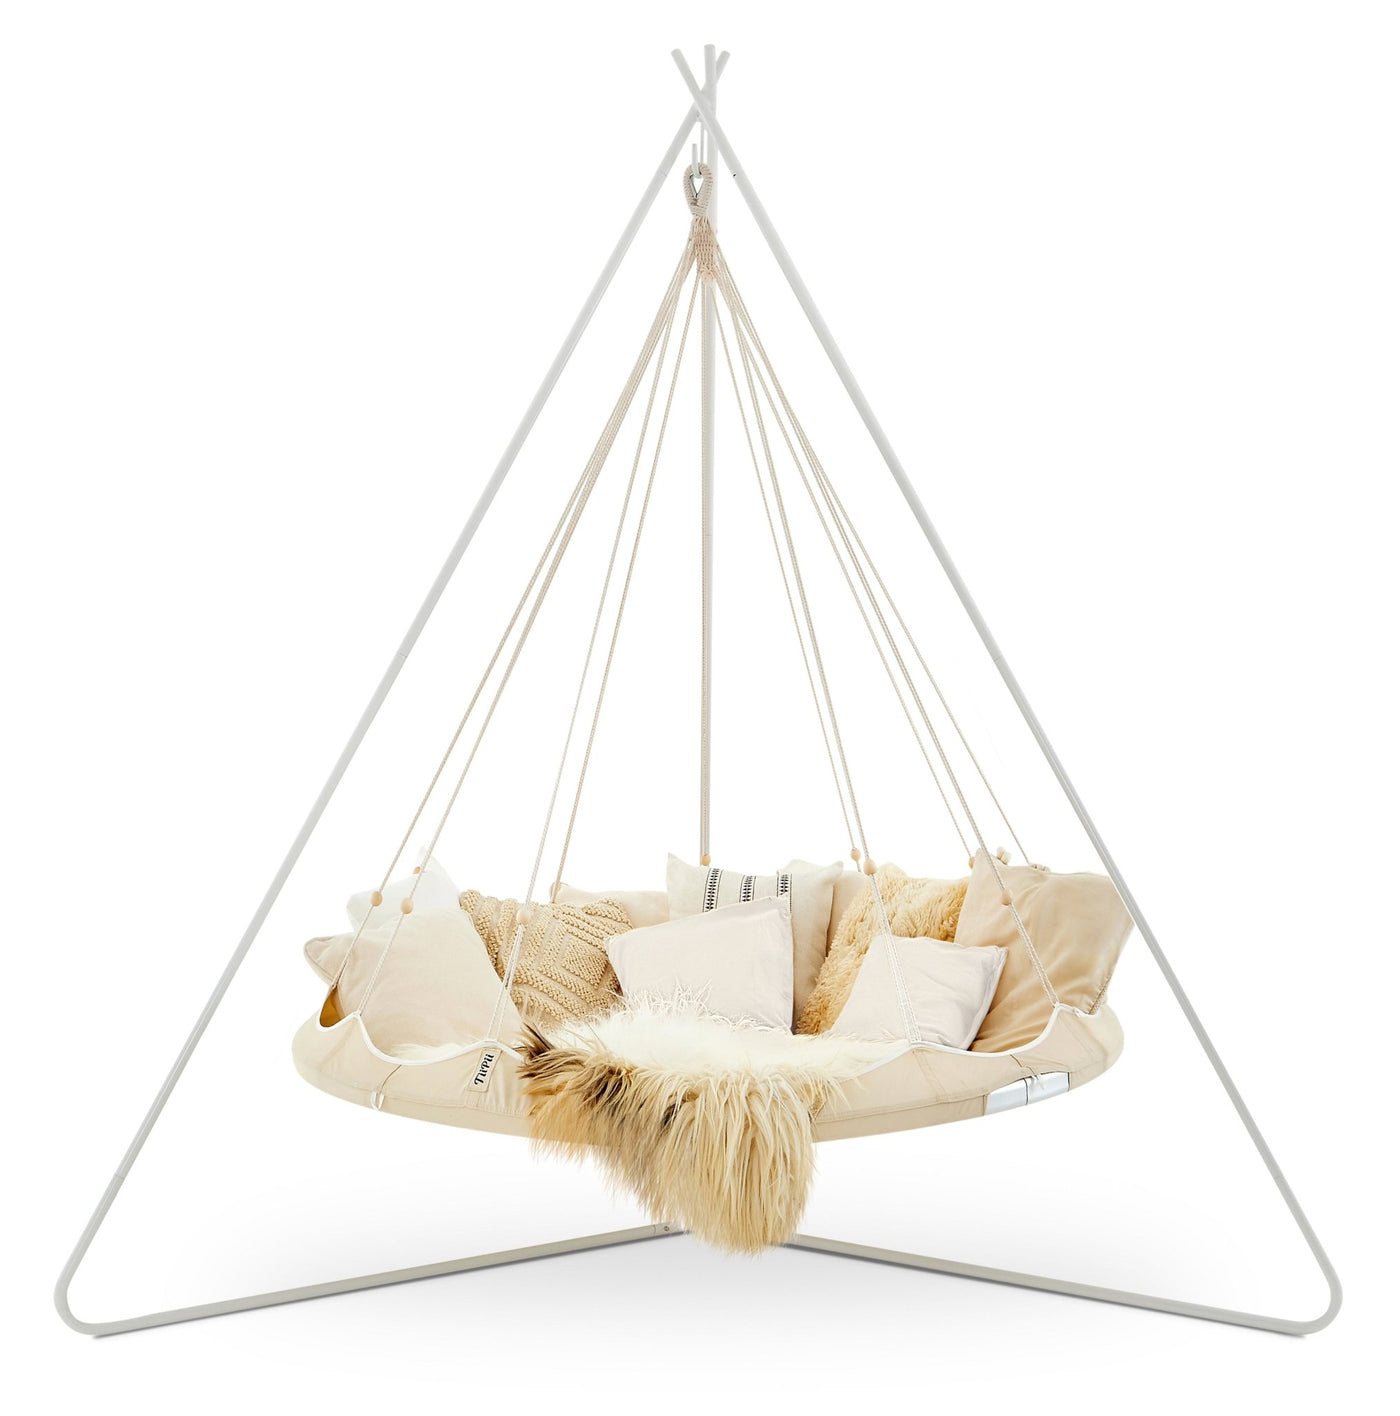 Hanging Bed | Classic